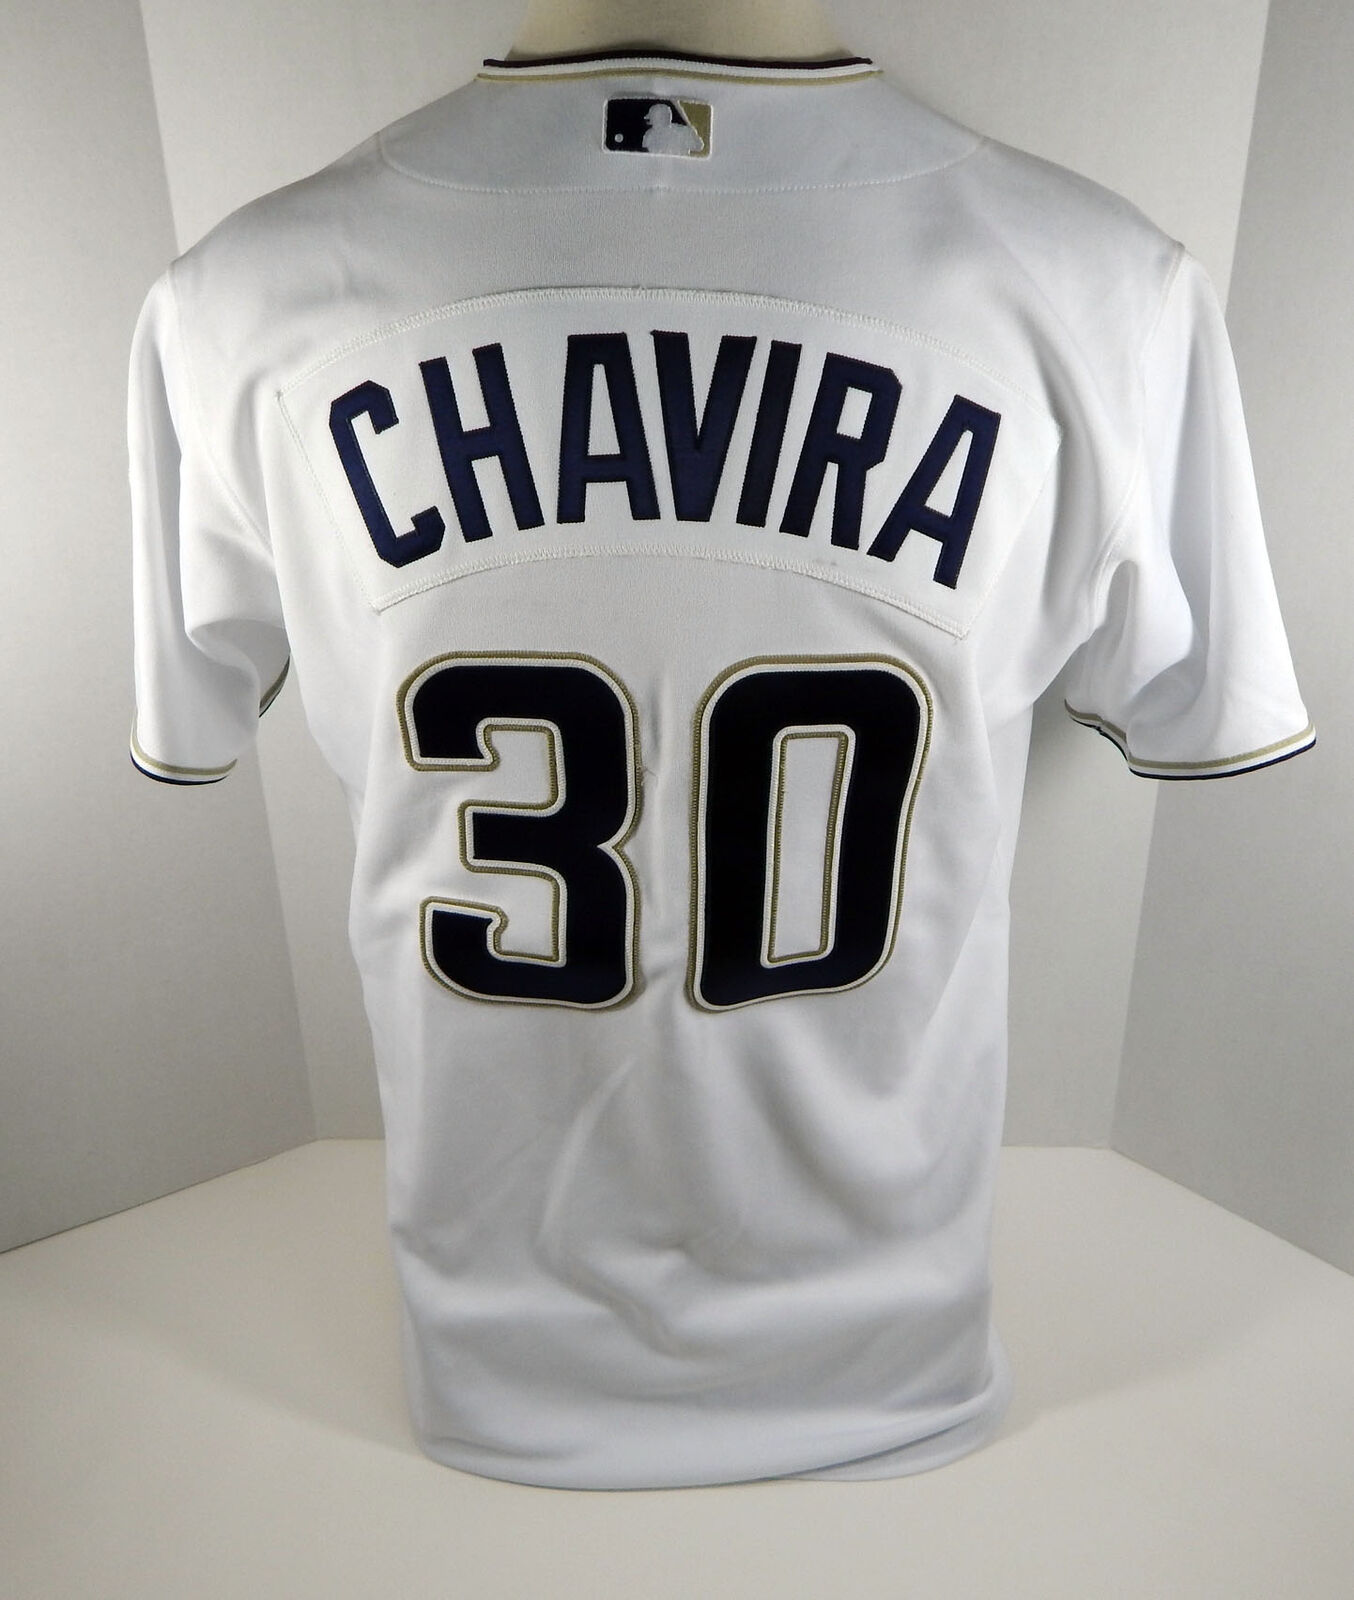 San Diego Padres Chavira #30 Game Issued White Jersey